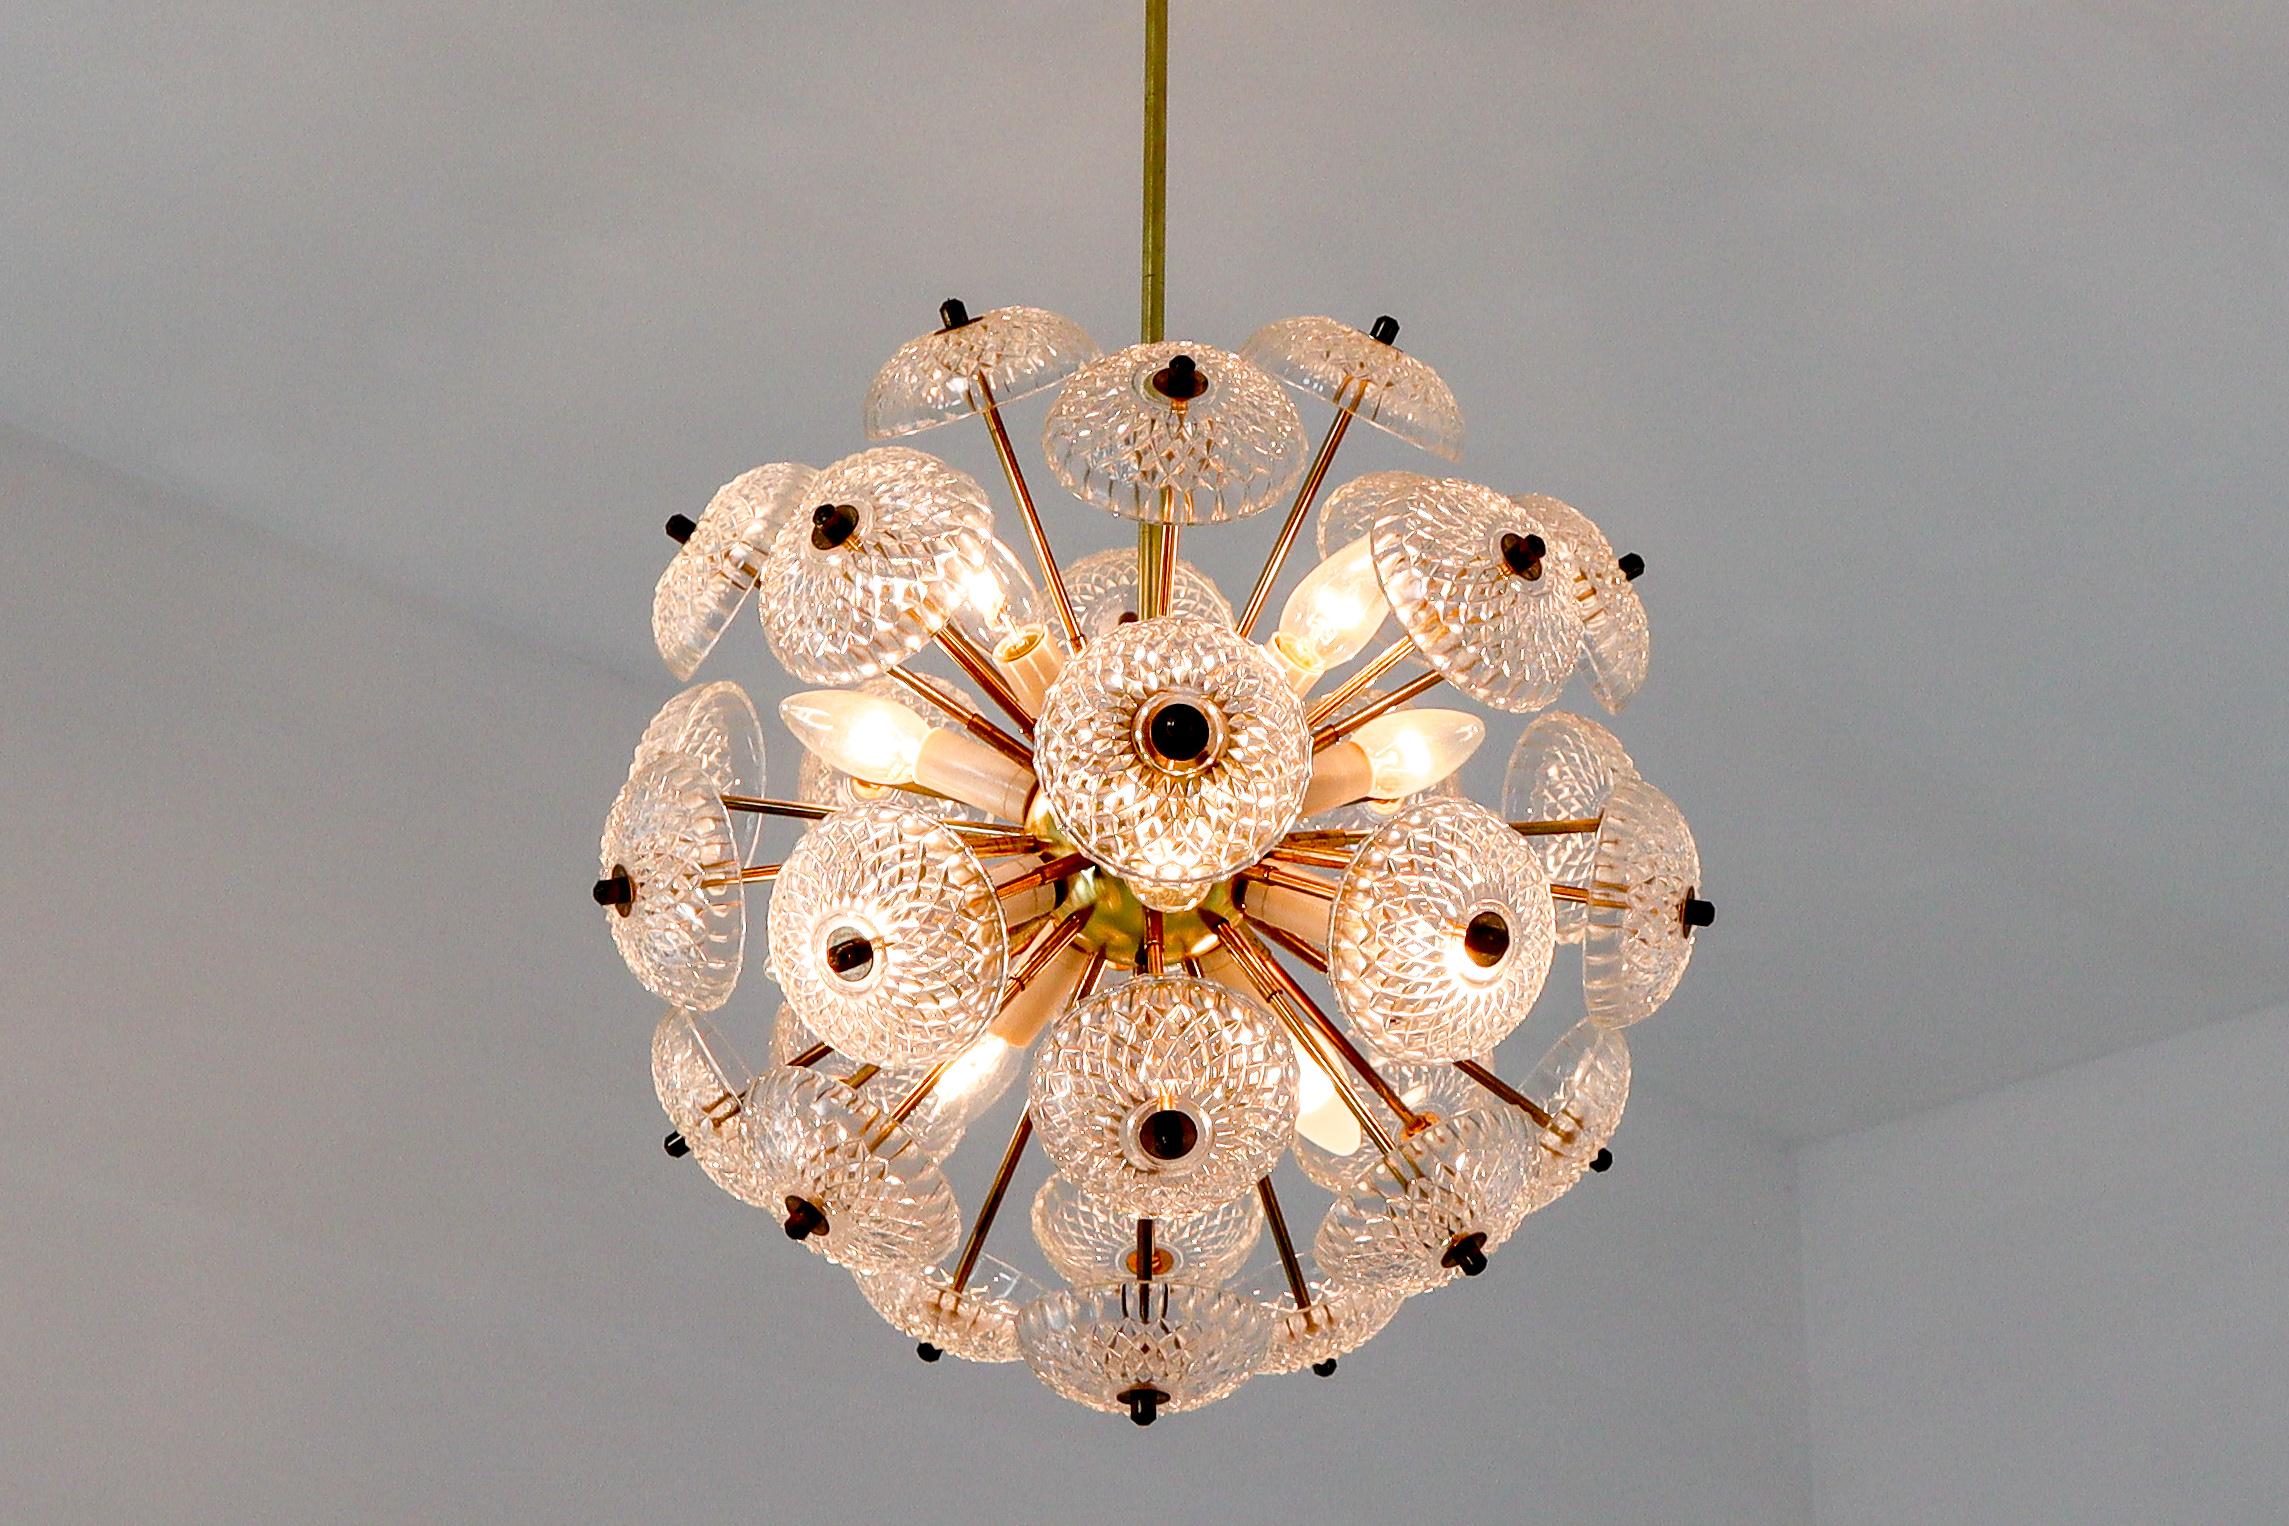 Large set midcentury brass floral chandeliers in the style of Emil Stejnar. 

Made of brass with stylish floral glass disc glass light diffuses. The lamp is covered with art glasses which scatter the light in a unique and very charming way by the